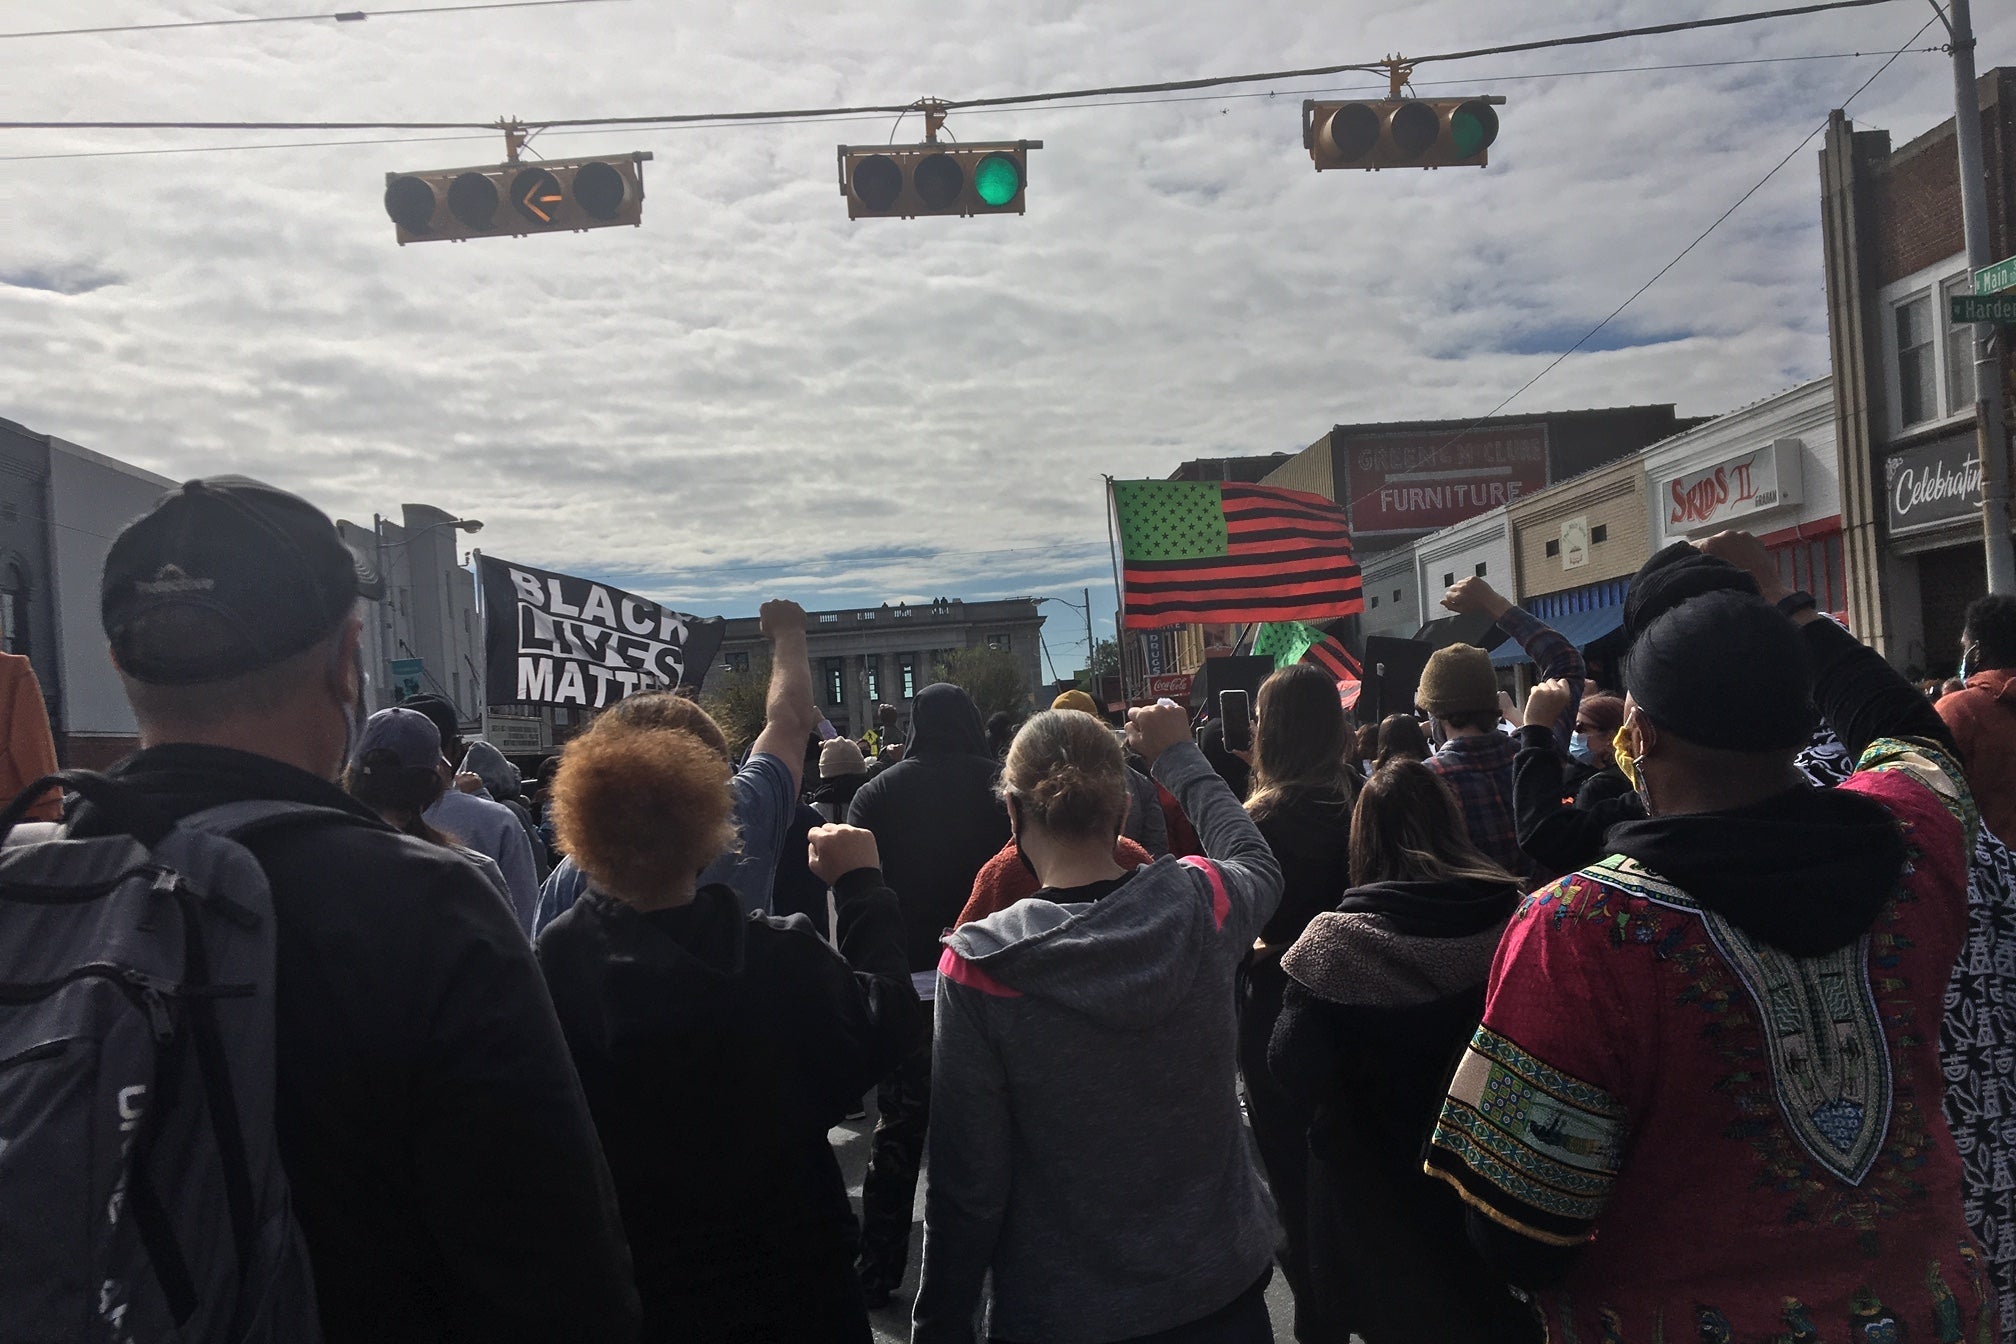 A crowd of people march down a street with a red, green, and black American flag and a Black Lives Matter flag